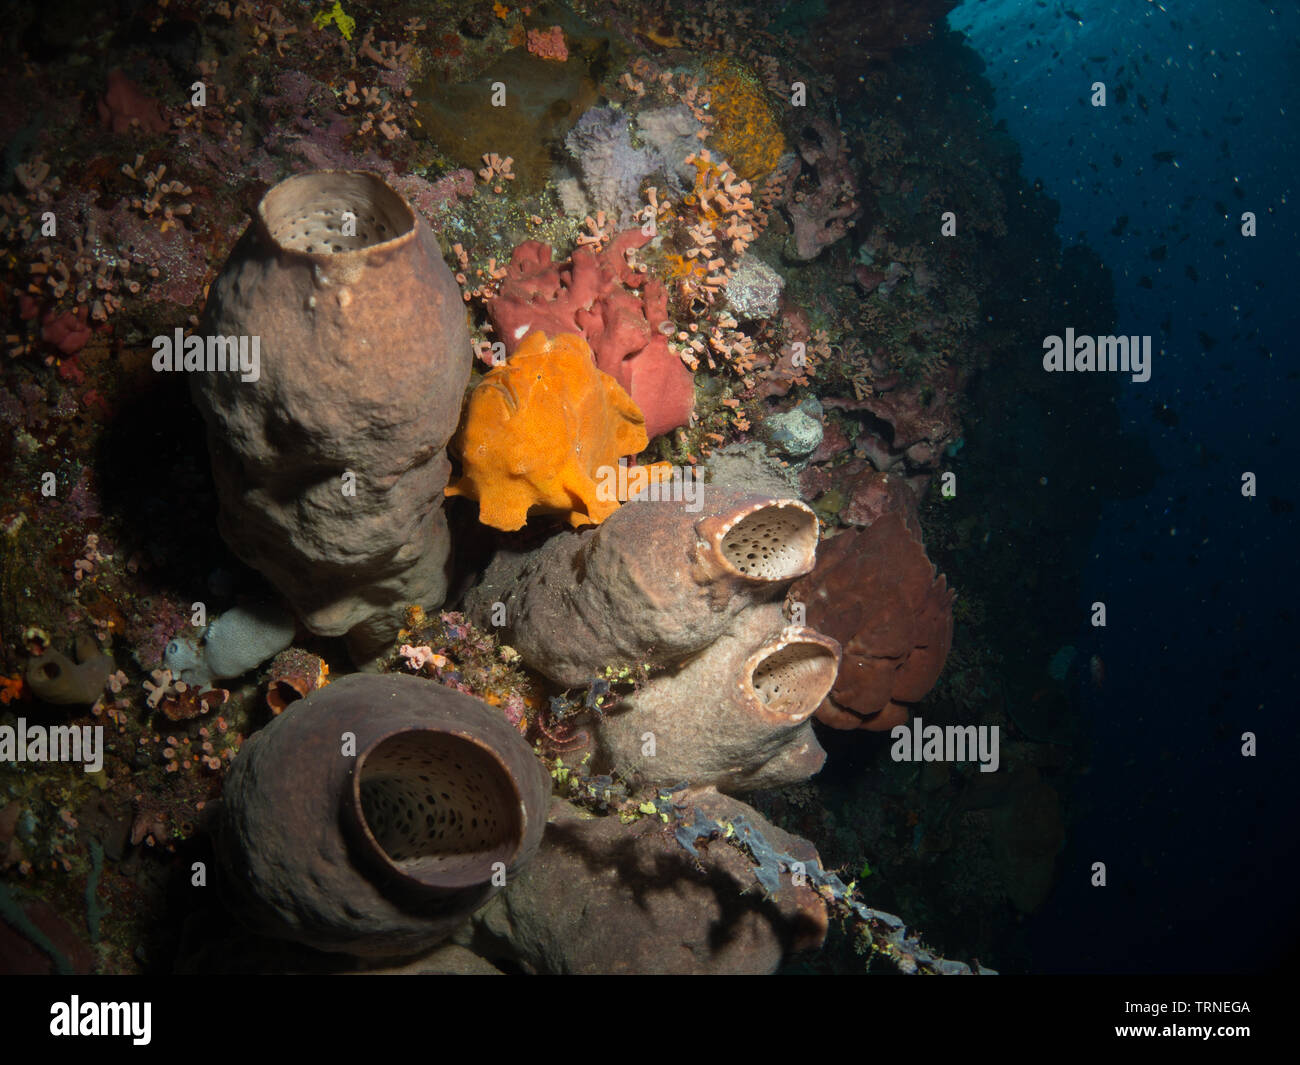 Giant frogfish (anglerfish) on a colorful coral reef underwater in Bunaken Marine Park, North Sulawesi, Indonesia Stock Photo